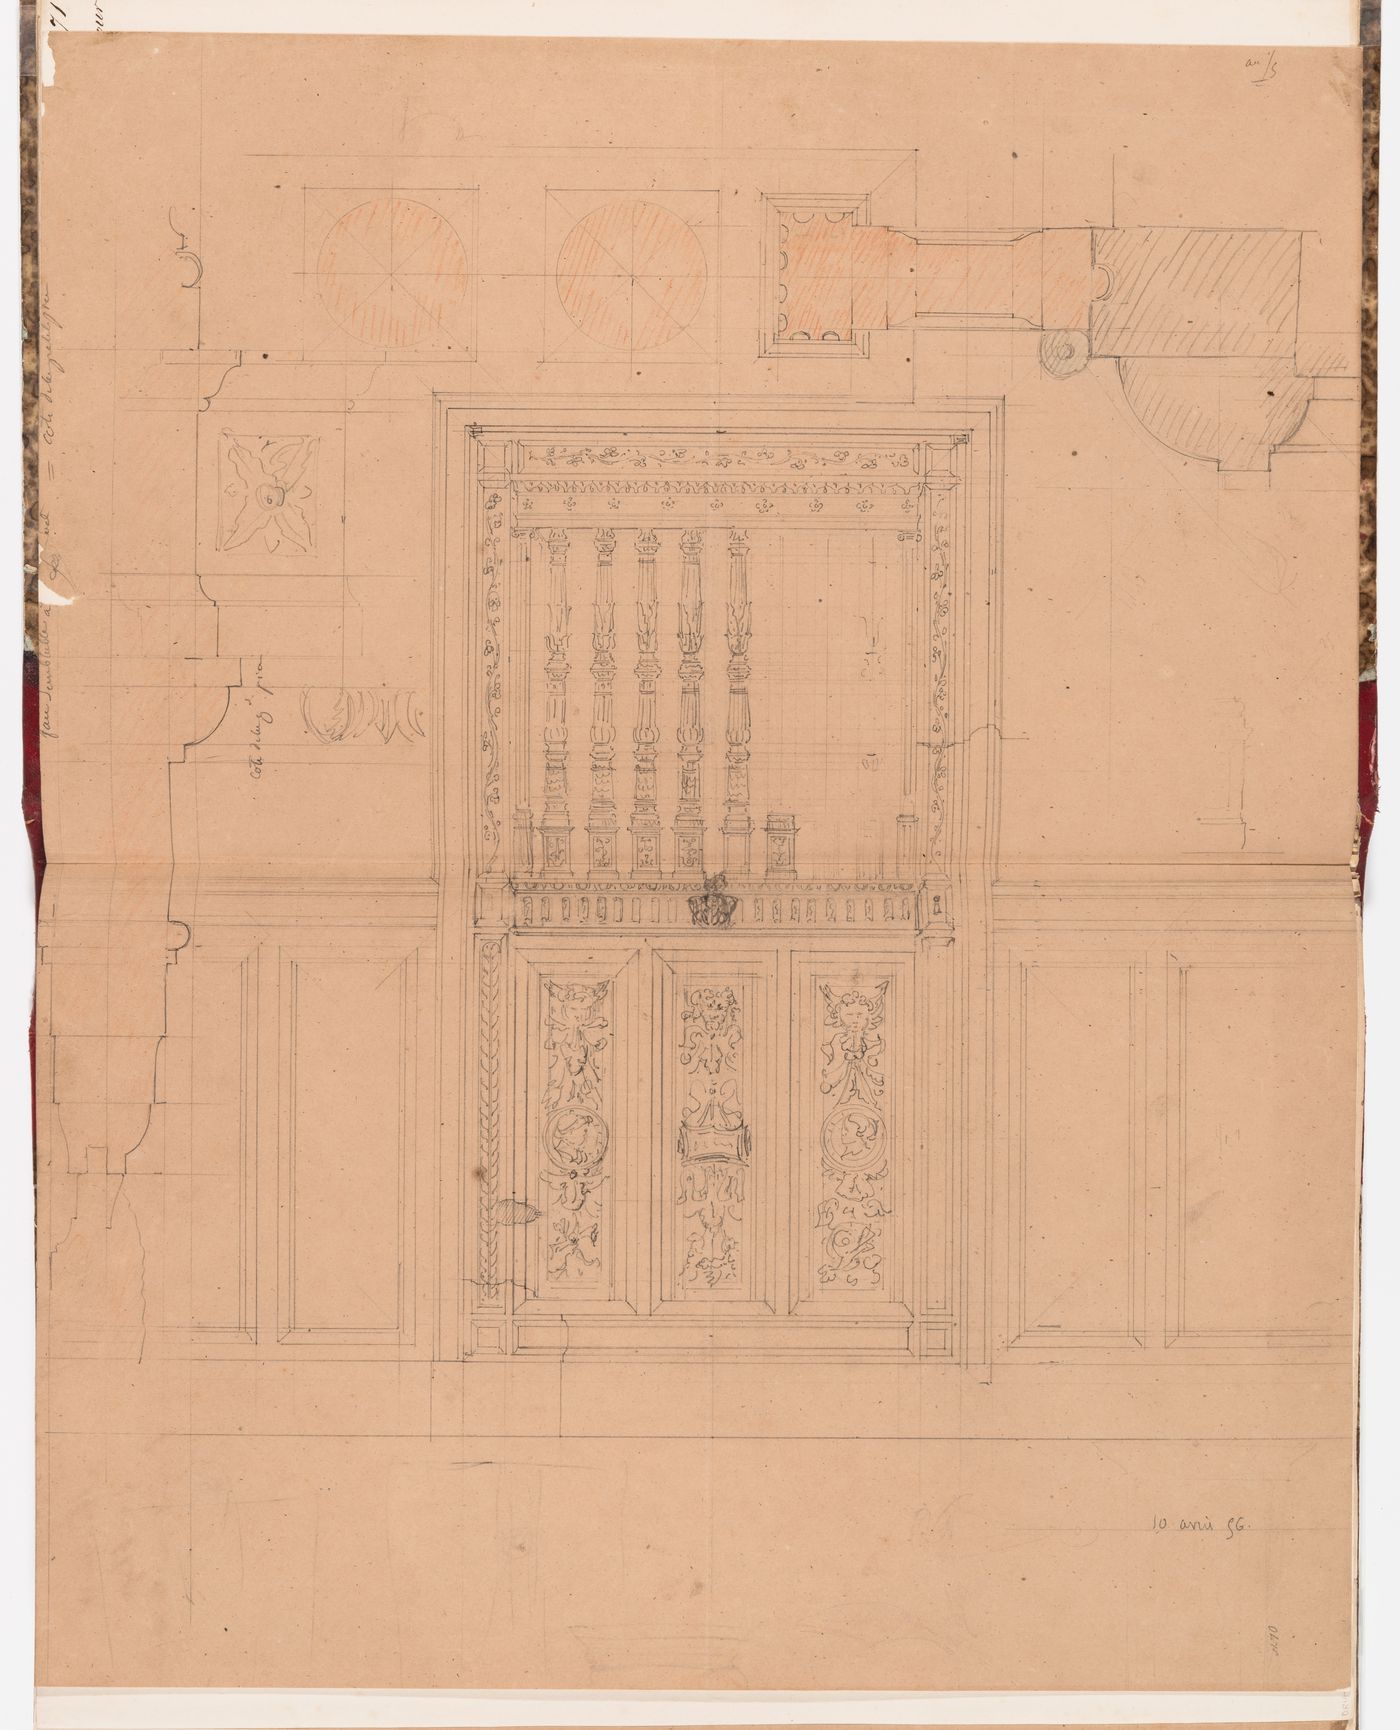 Elevation, joinery details and details for the ornamentation for a wooden screen for the "cabinet de travail" or the "cabinet sur la cour" on the second floor, Hôtel Soltykoff